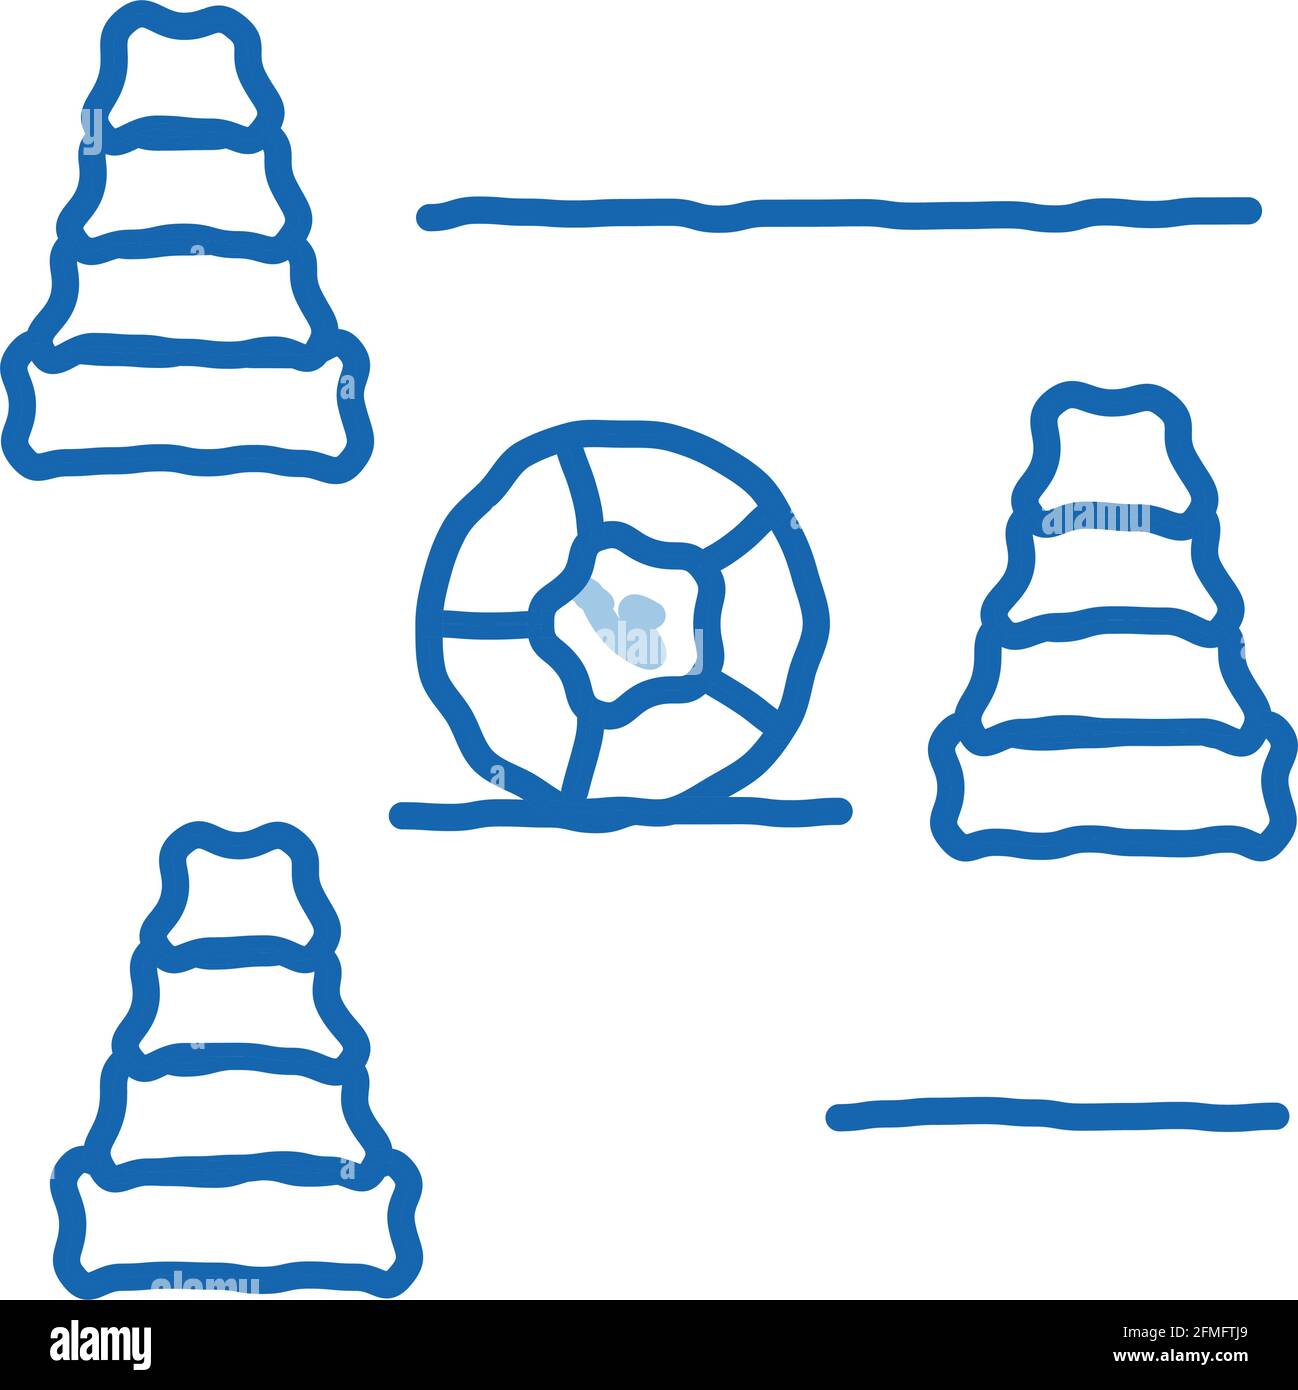 Football training cones Cut Out Stock Images & Pictures - Alamy